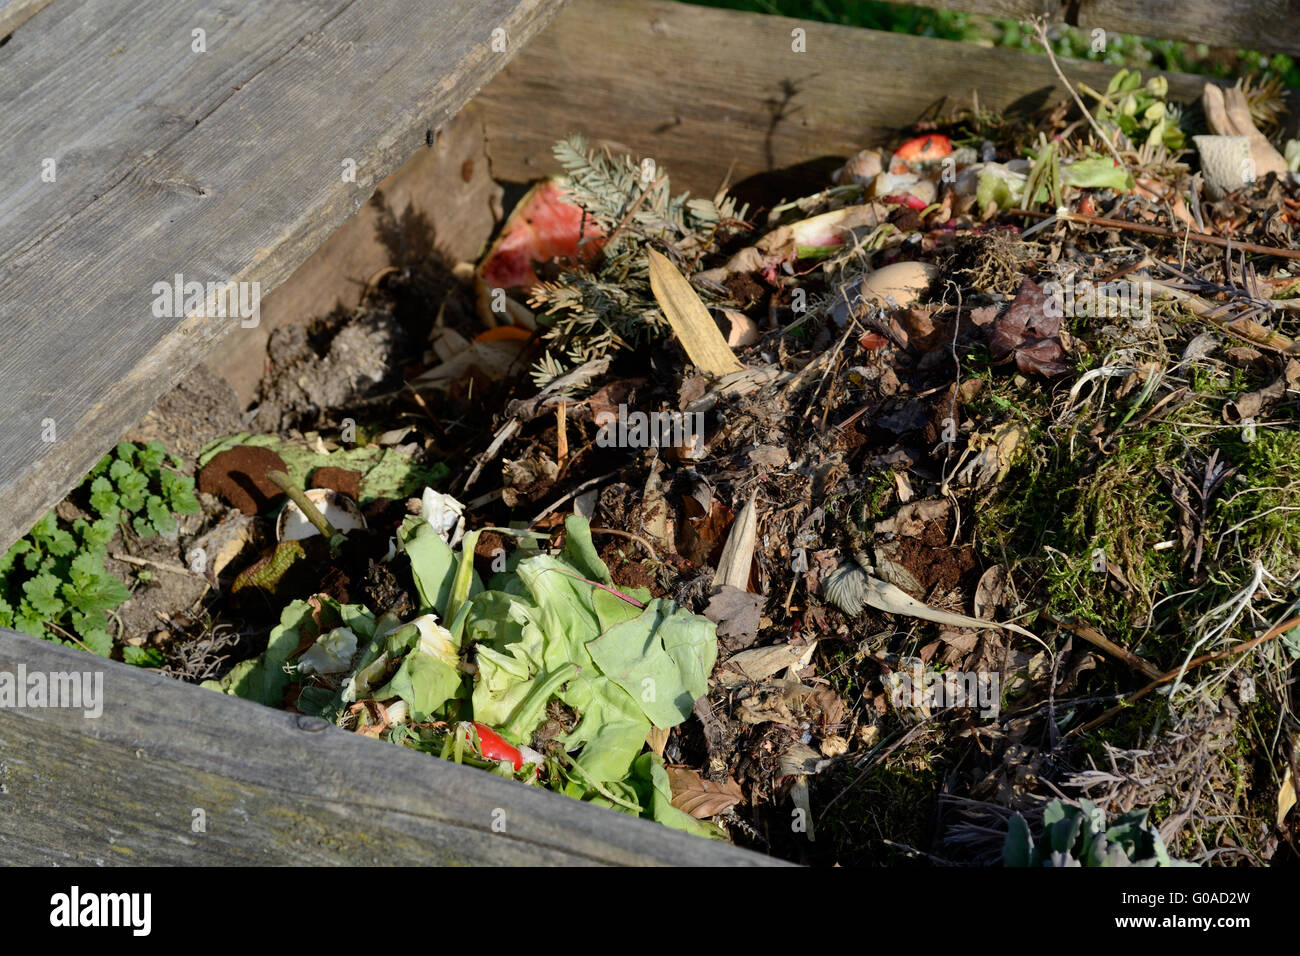 Wooden compost bin with garden and kitchen waste Stock Photo